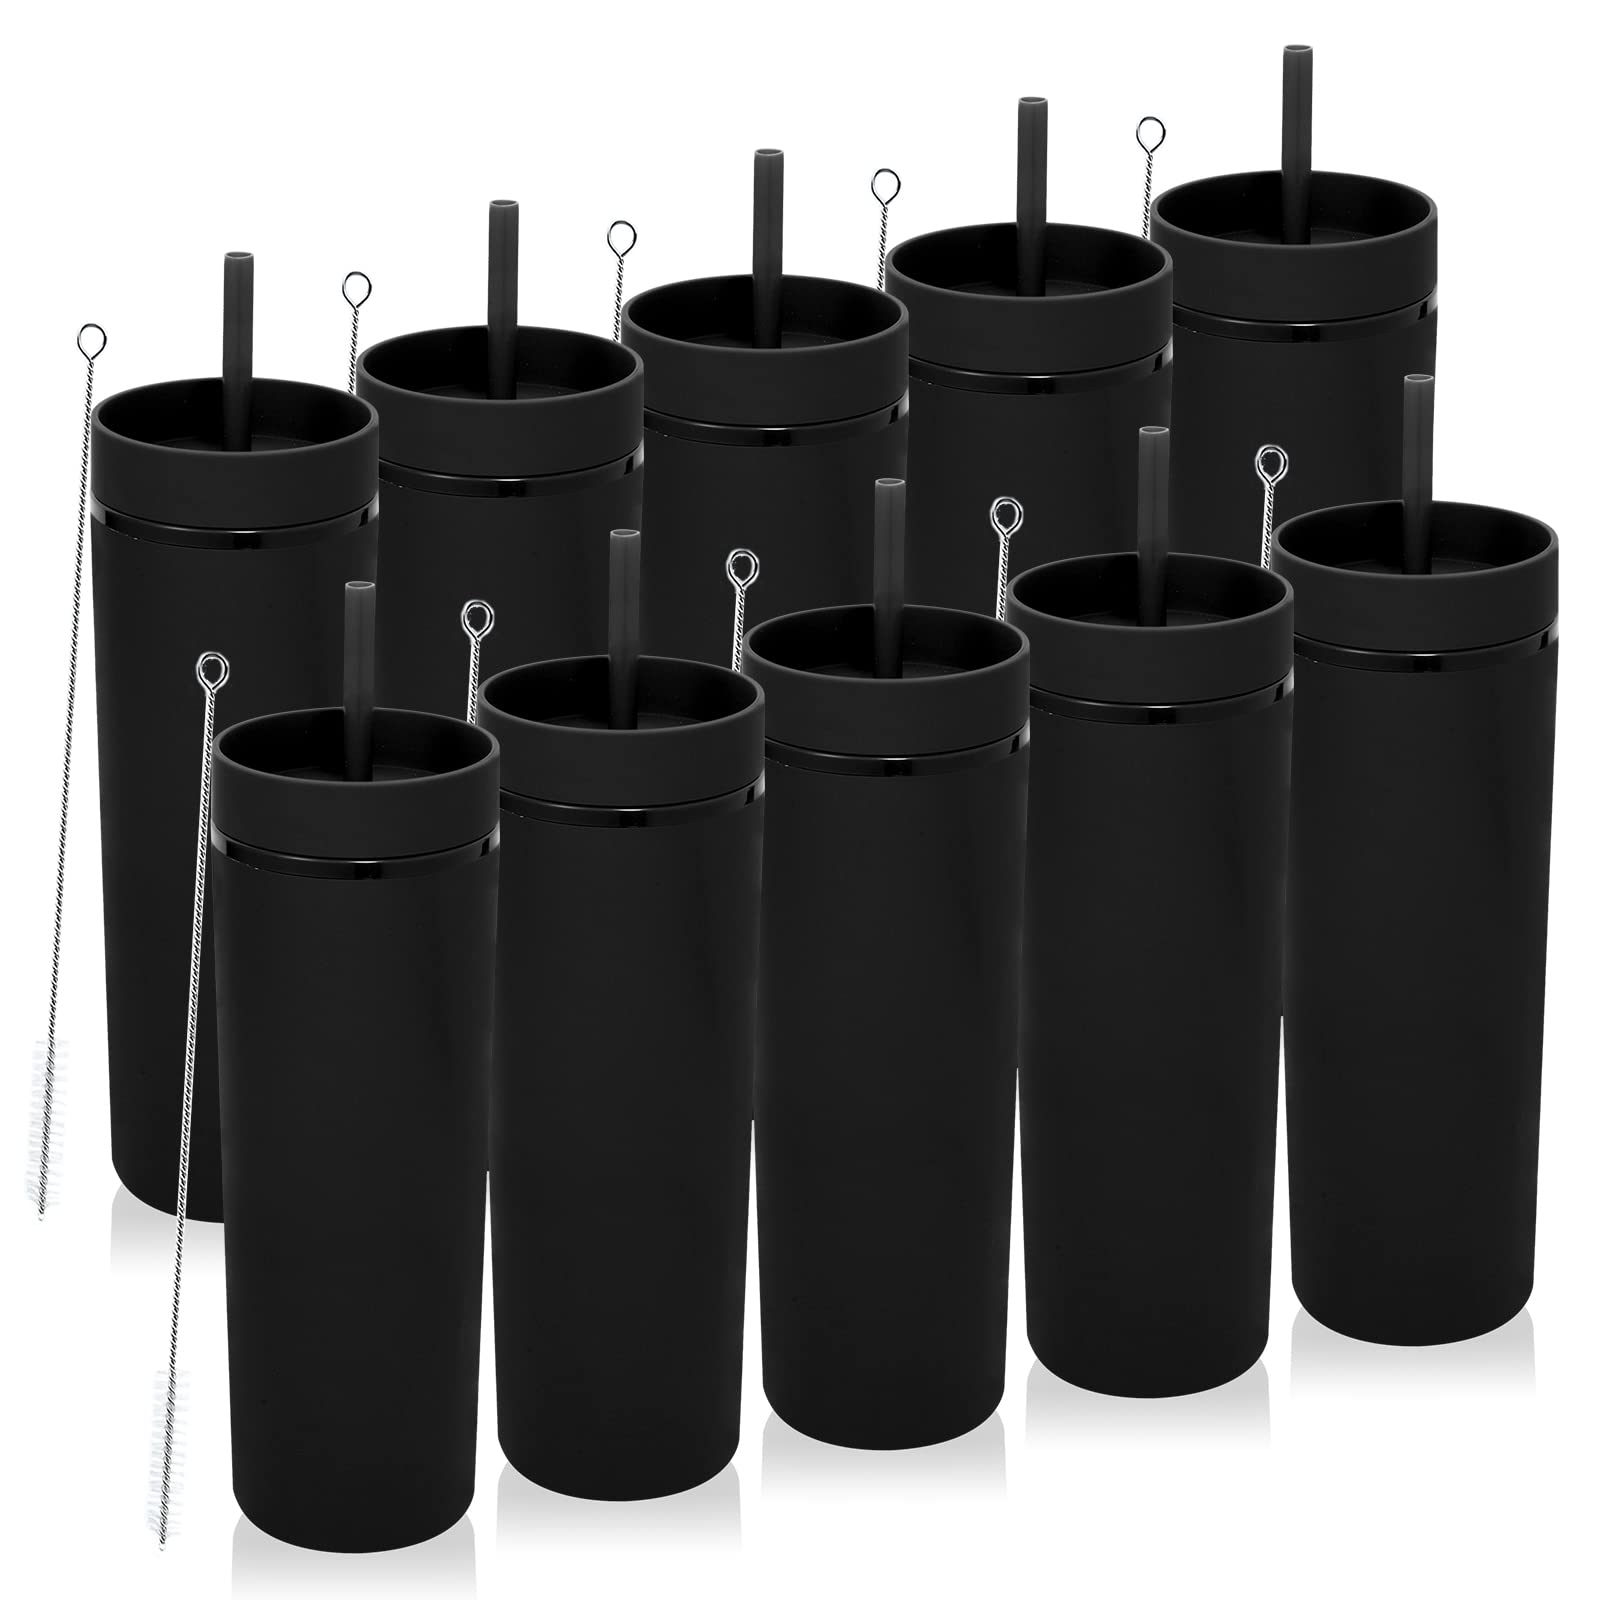 Volhoply 20oz Plastic Skinny Tumblers Bulk 10 Pack,Double Wall Tumbler with Lid and Straw,BPA Free Matte Acrylic Iced Coffee Cups With Straw,Reusable Travel Cute Mug for Party,DIY Gift(Black,10 Set)